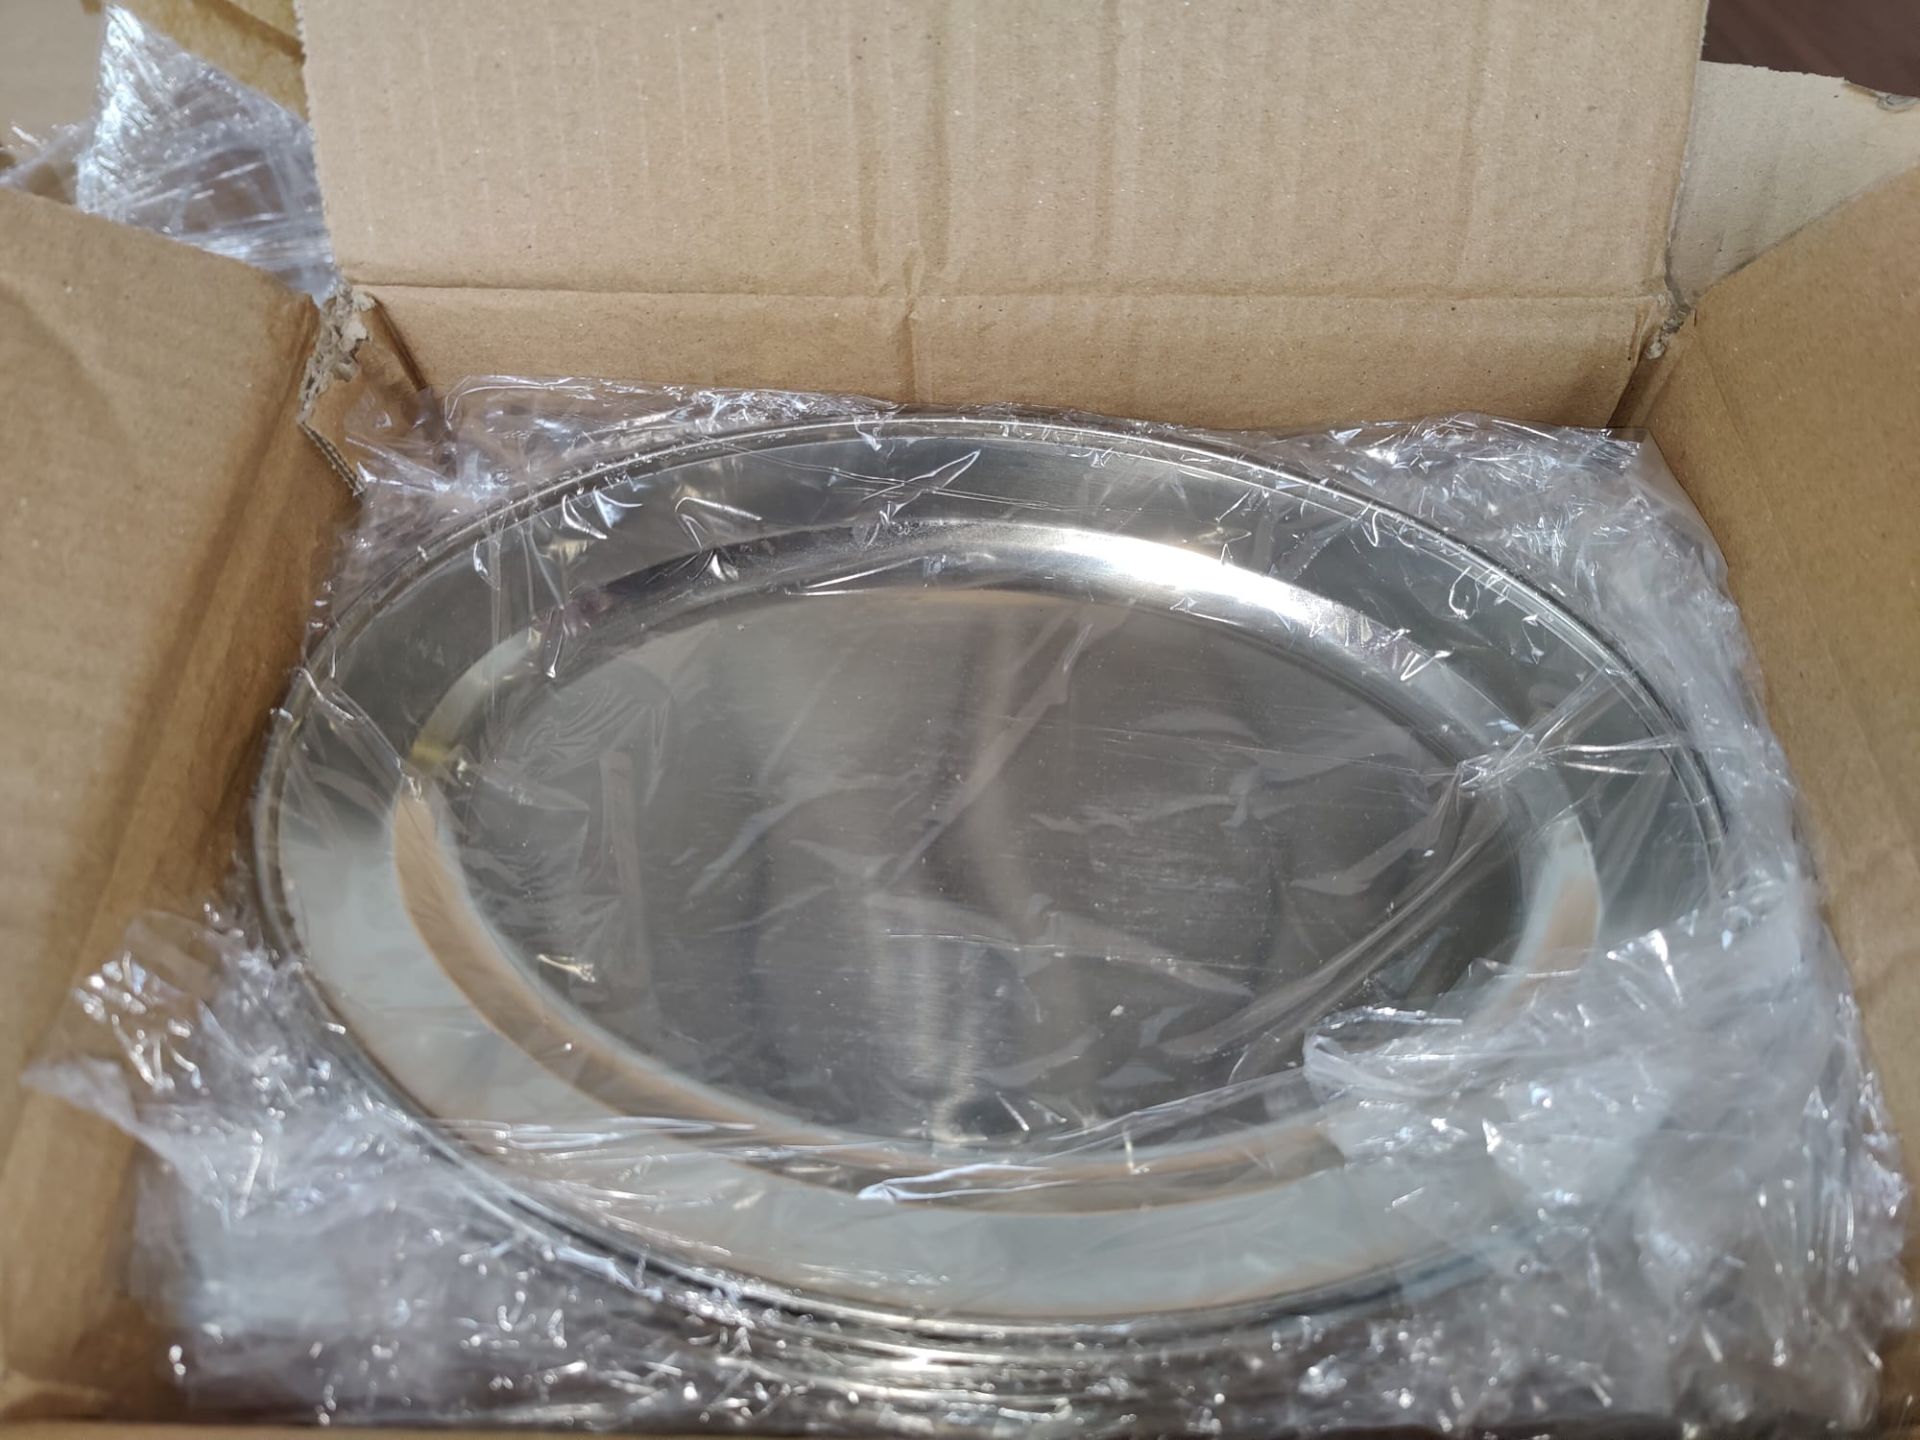 18 x Stainless Steel Small Oval Service Trays - Size: 255mm x 180mm - Brand New Boxed Stock RRP £90 - Image 7 of 8